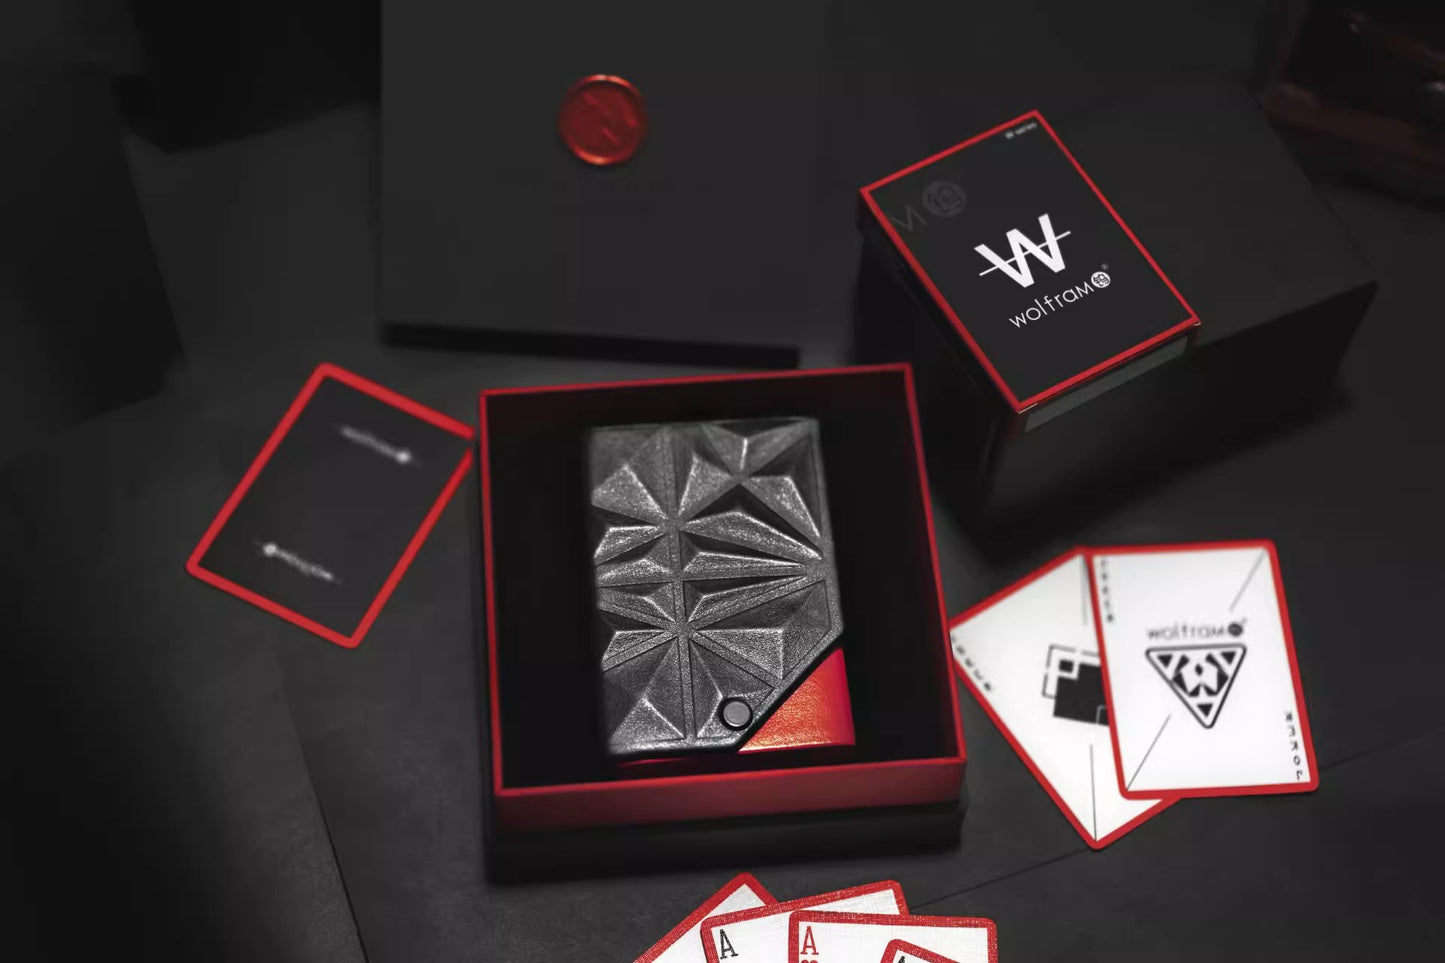 Wolfram Playing Cards